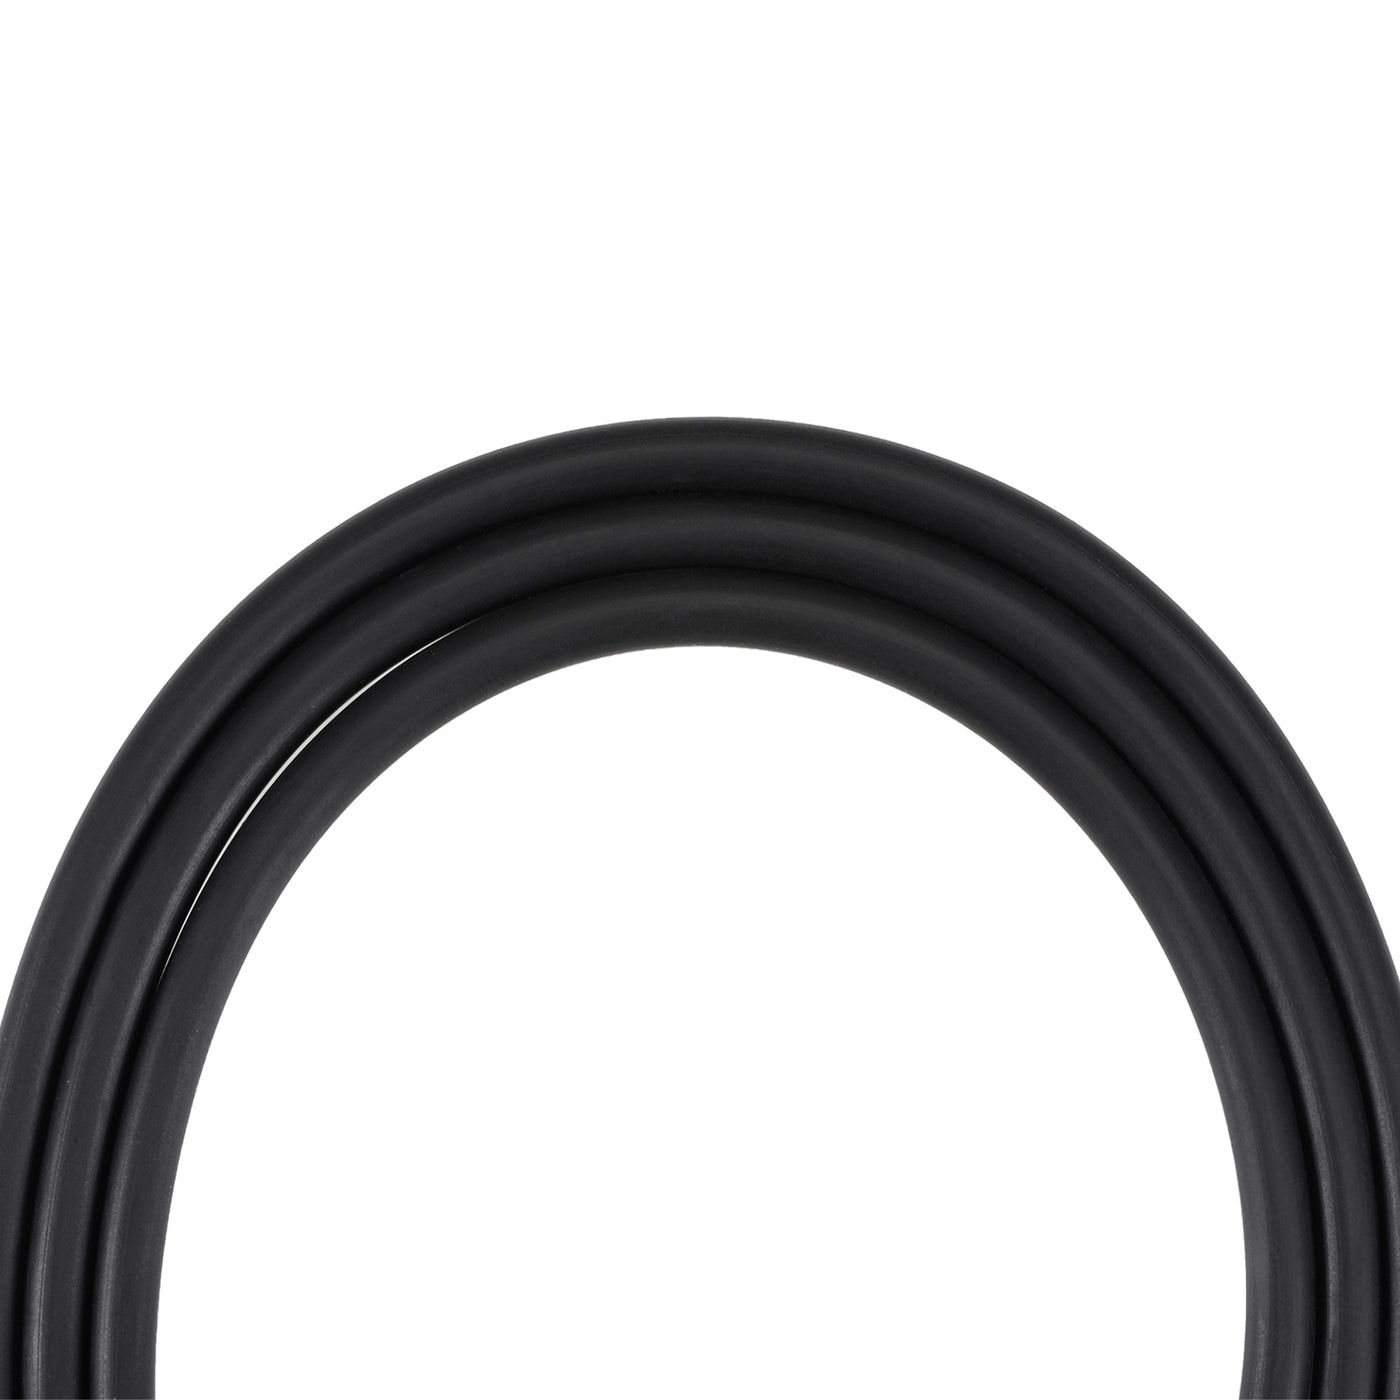 uxcell Uxcell Fuel Line Hose 2mm ID 4mm OD 16ft Oil Line & Fuel Pipe Rubber Water Hose Black